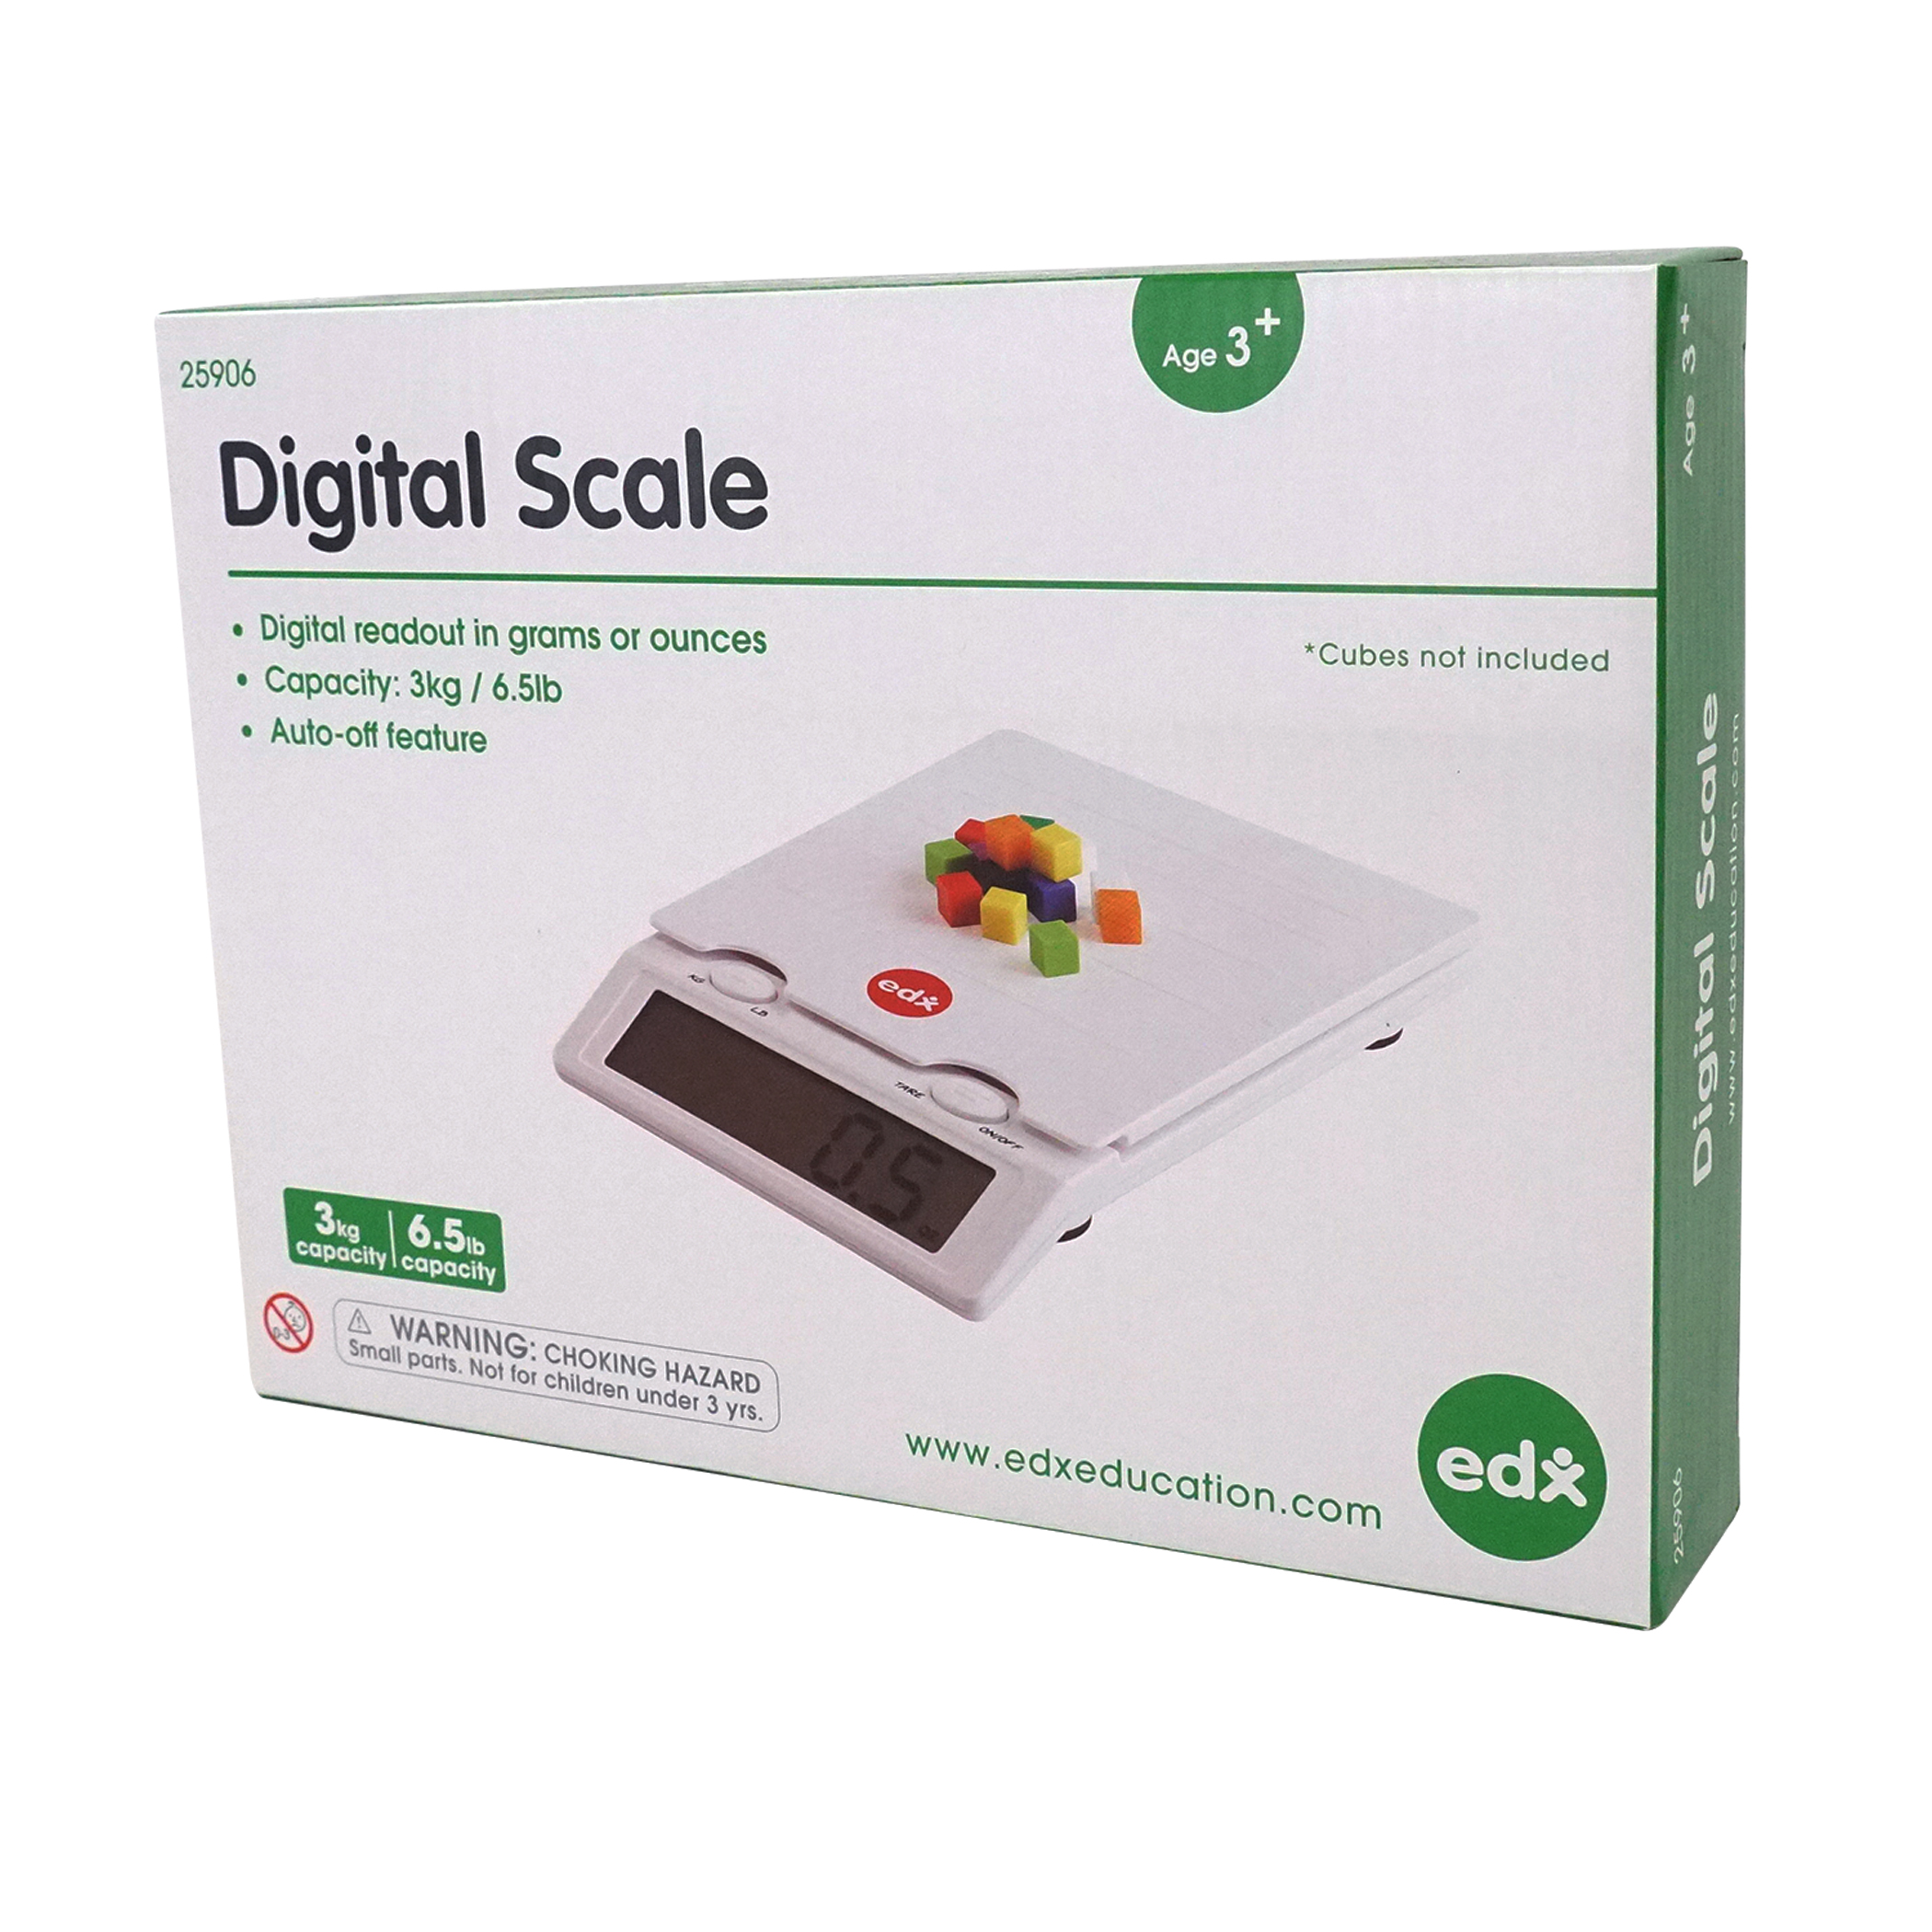 The Teachers' Lounge®  Digital Scale - Weigh in Pounds, Ounces, Grams,  Kilograms - Max Weight of 6.5 lbs